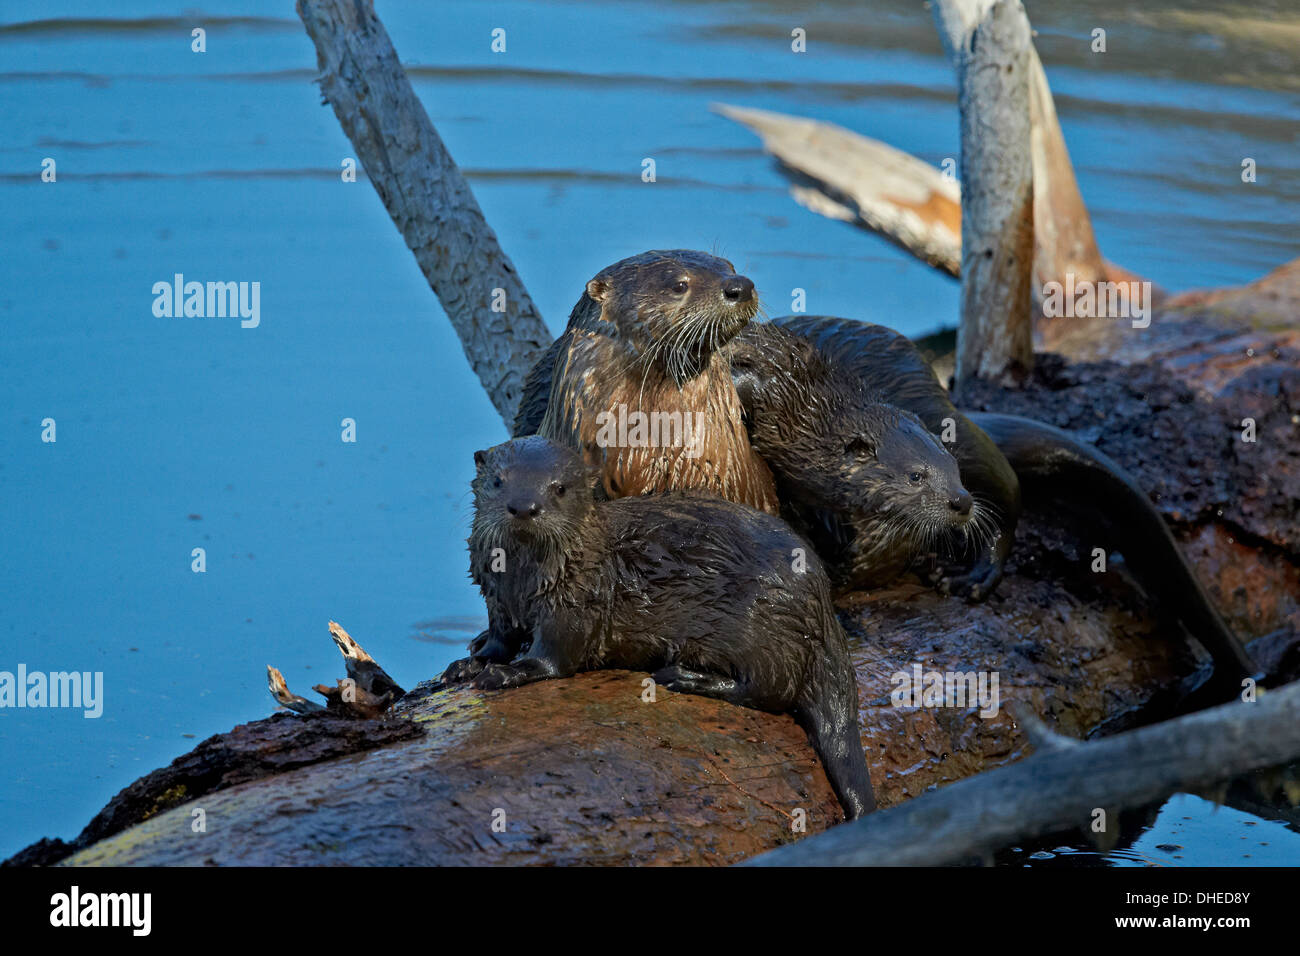 River otter (Lutra canadensis) mother and two pups, Yellowstone National Park, Wyoming, United States of America, North America Stock Photo